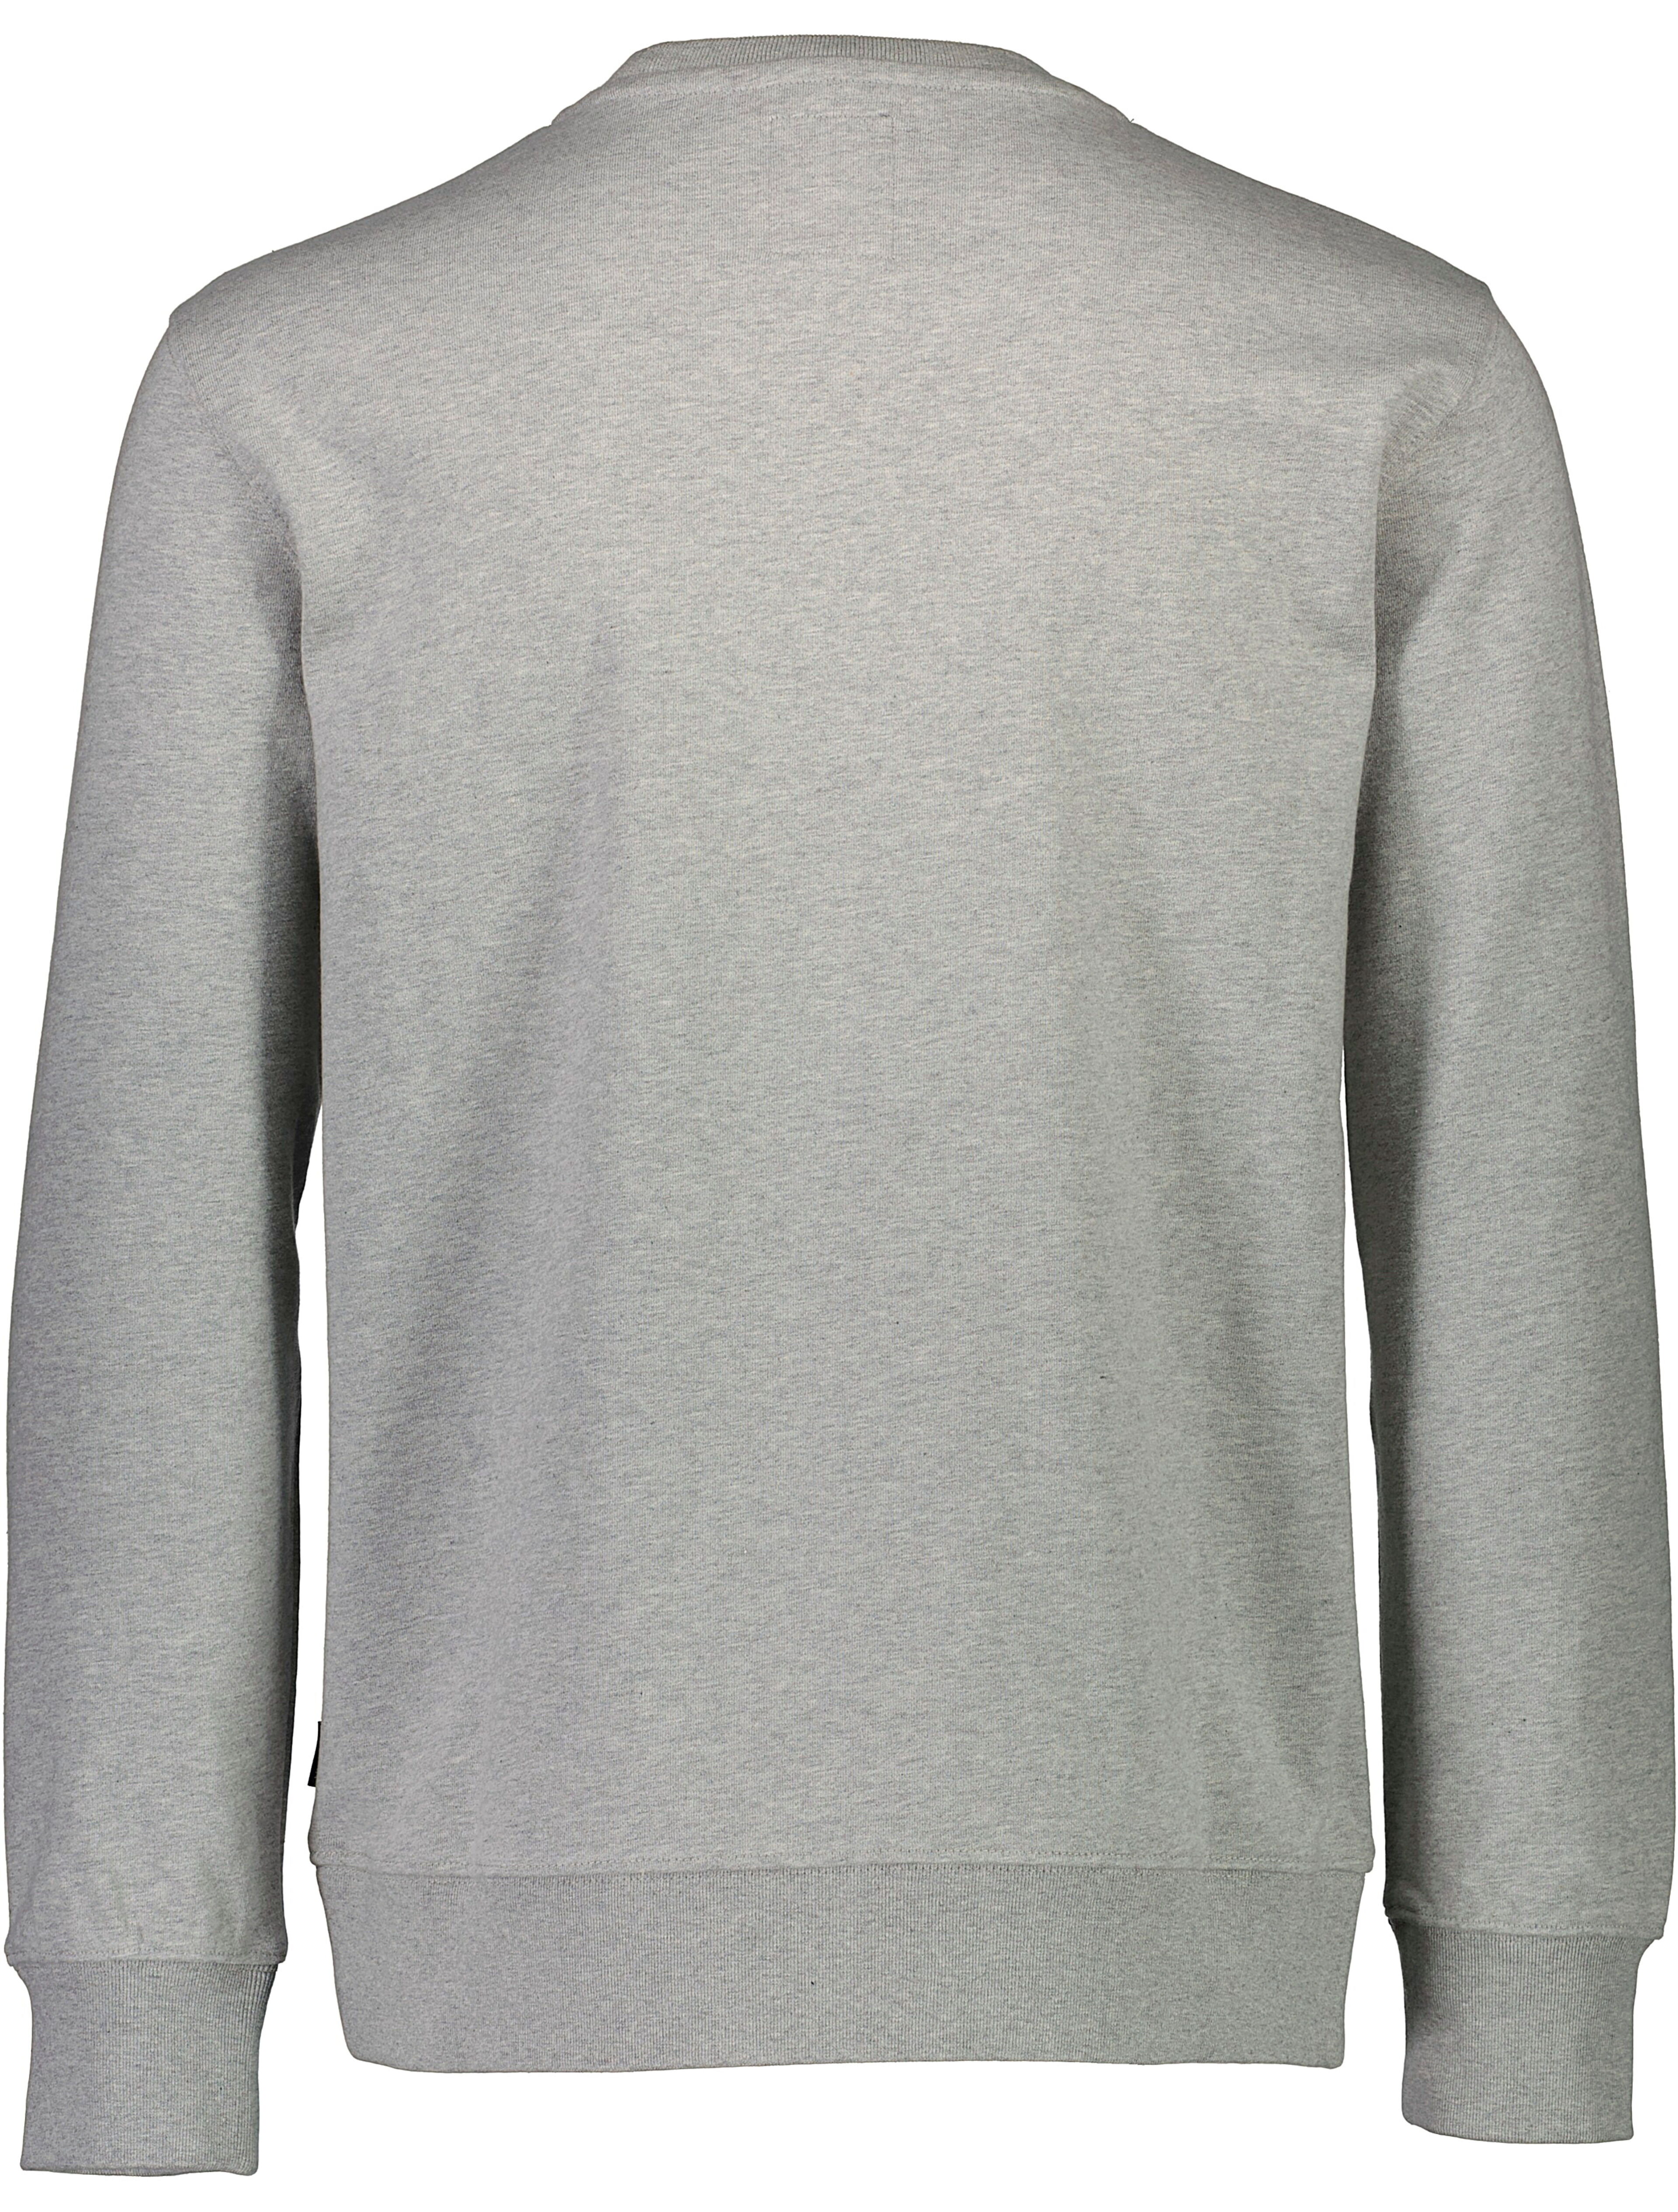 Sweatshirt | Relaxed fit 30-724030